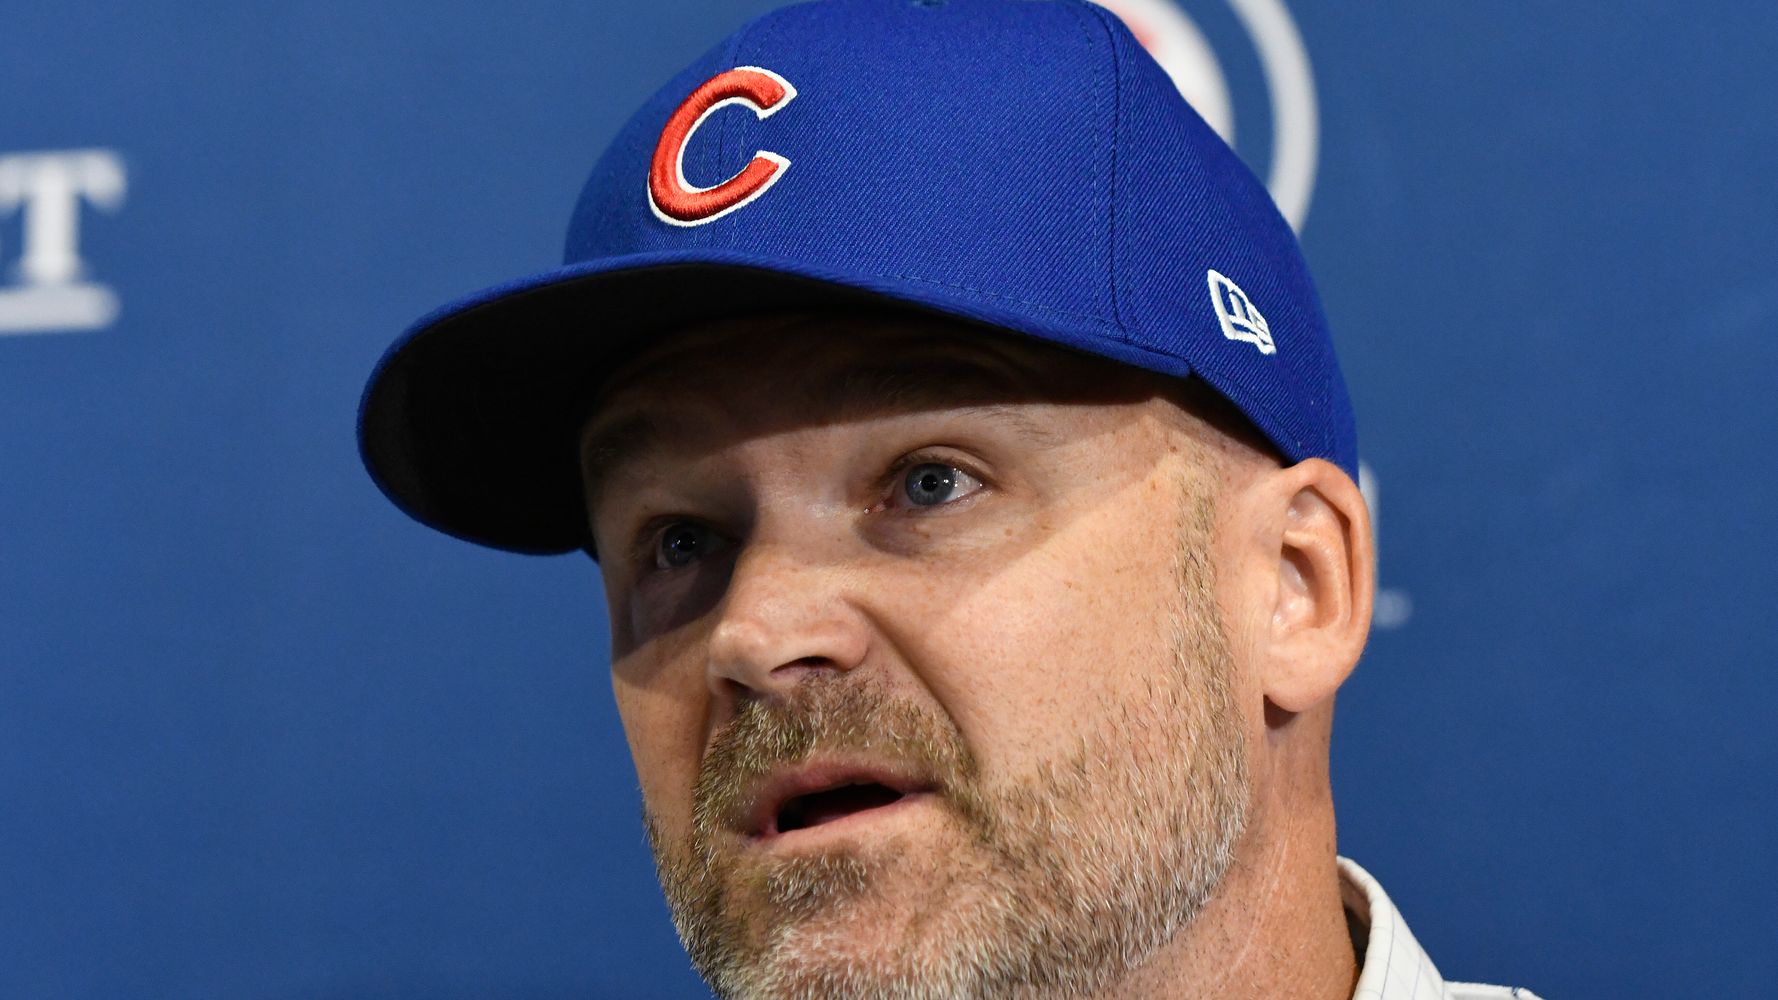 Torrey Devitto Confirms Romance With Chicago Cubs Manager David Ross